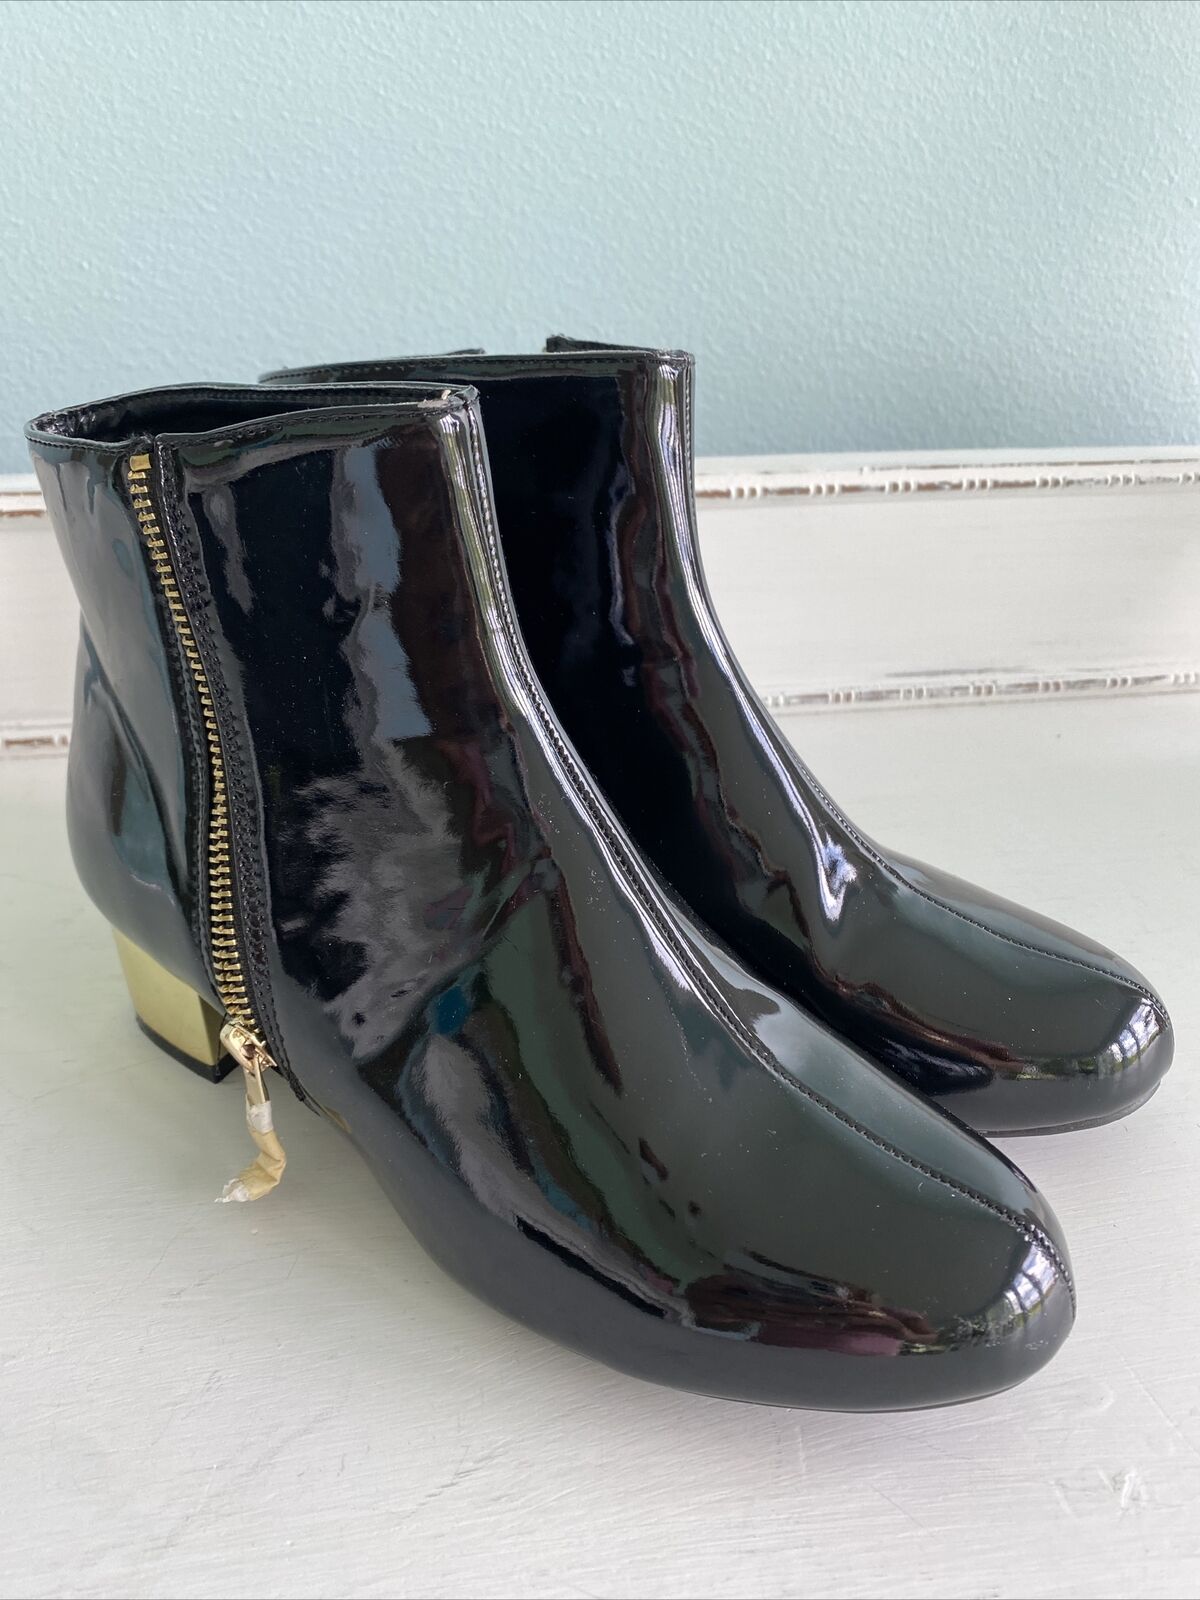 Wanted Boots NEW Women's Bumble Shoe, Black Patent Ankle Booties